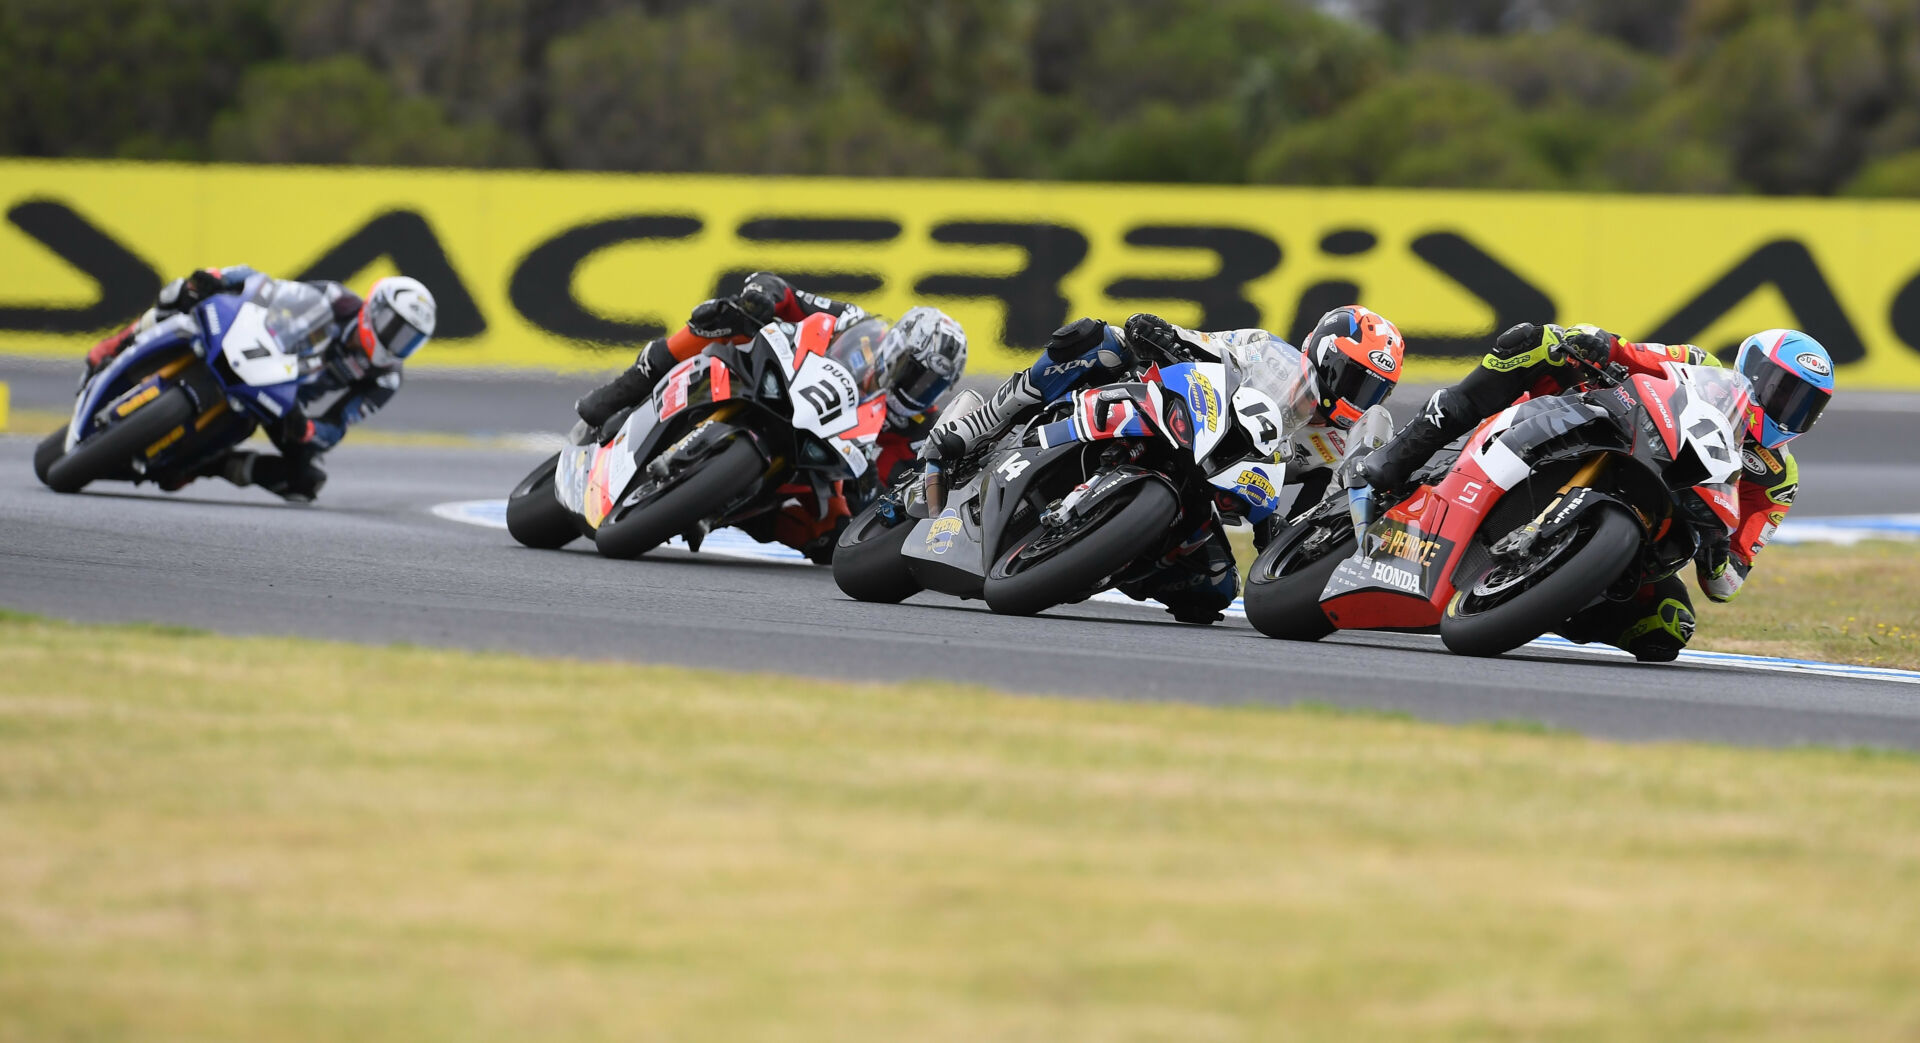 Troy Herfoss (17) leads Glenn Allerton (14), Josh Waters (21), and Mike Jones (1) early in Race One Saturday at Phillip Island. Photo courtesy ASBK.